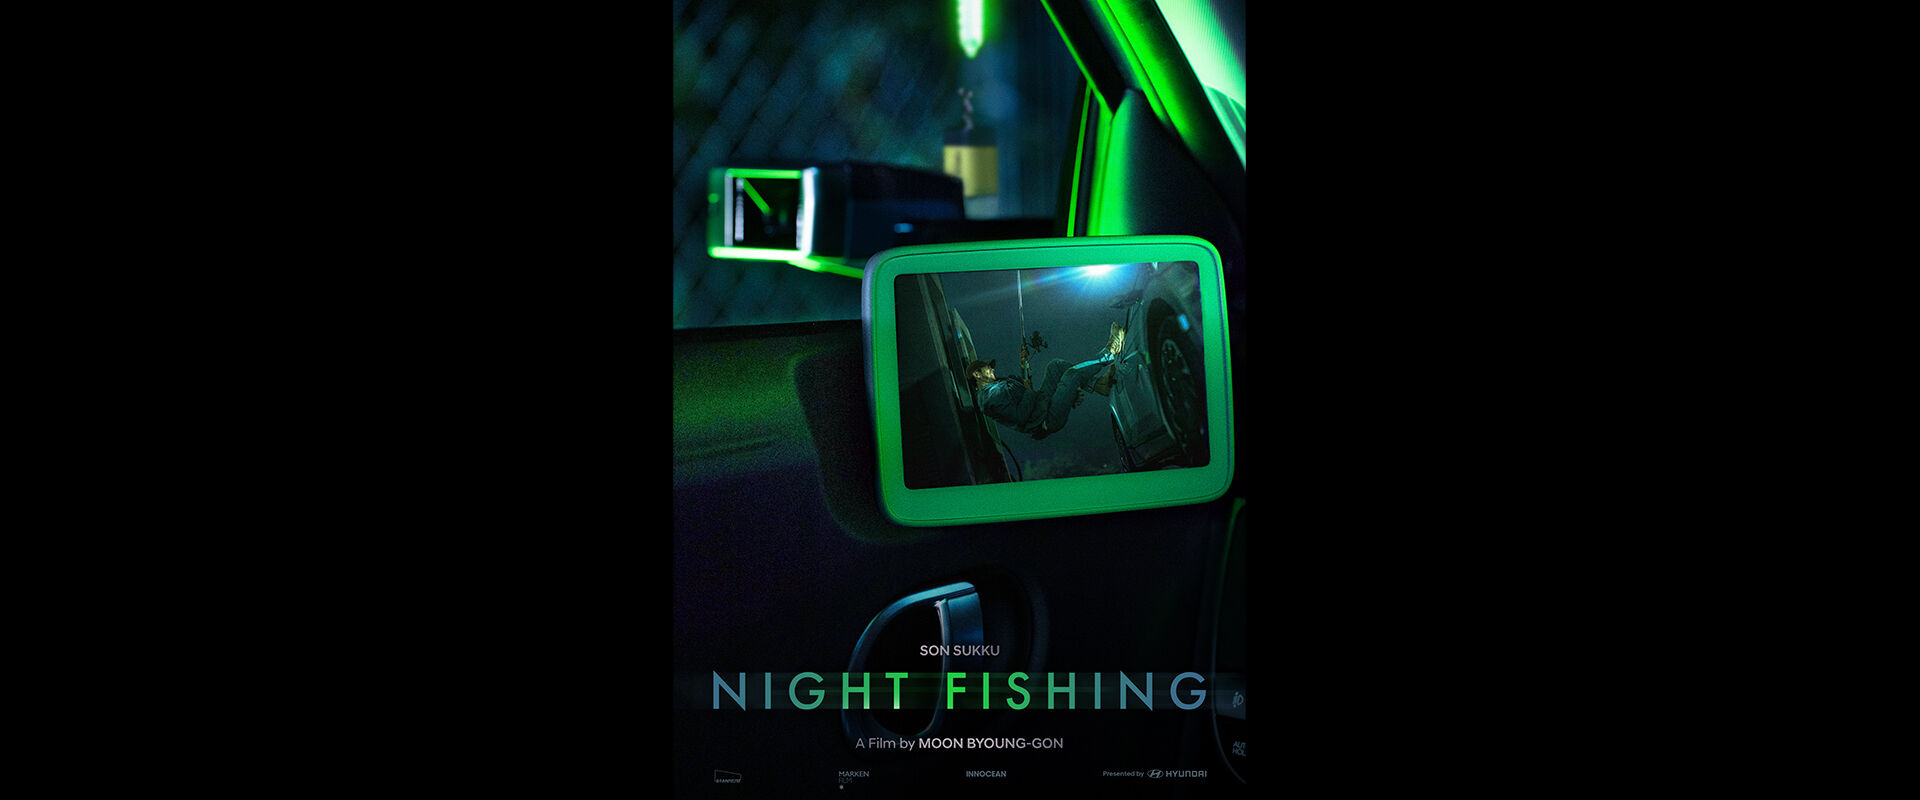 Hyundai Motor Presents Its First Film ‘Night Fishing’ in Collaboration with K-Movie Star Son Sukku